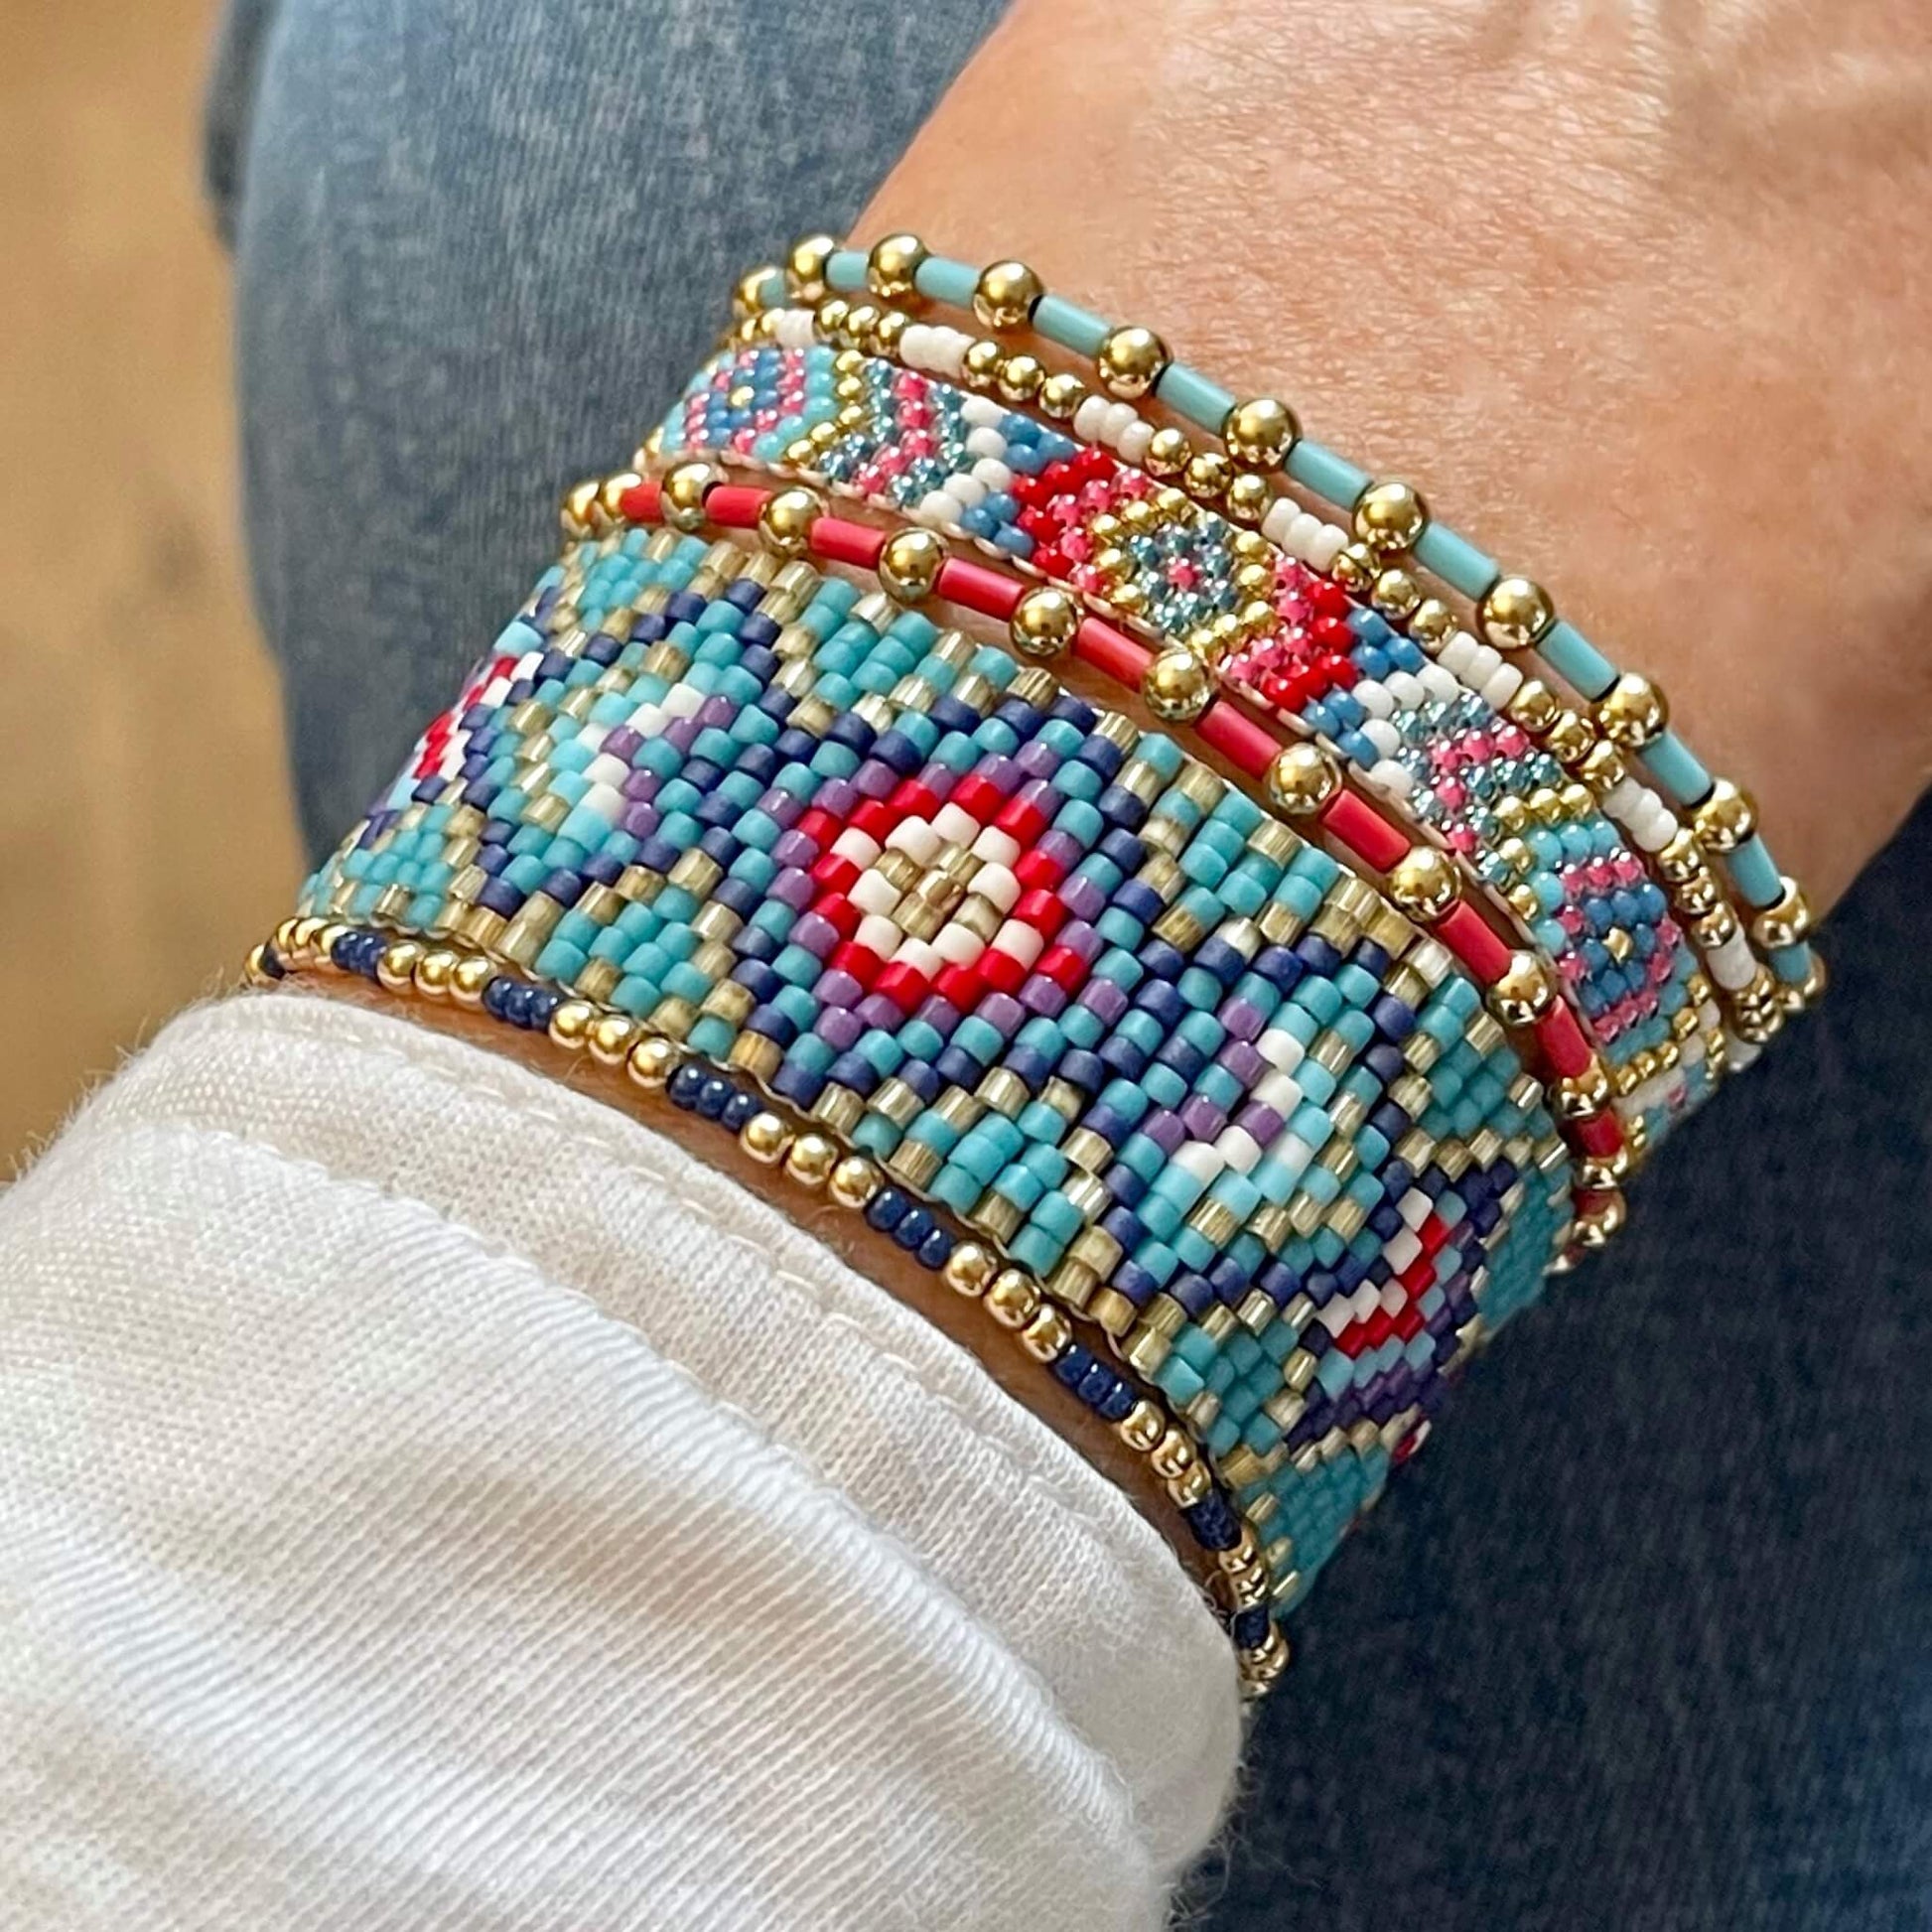 Santa Fe inspired stretchy bracelets and flat beaded bracelets with turquoise, red, white, purple, and gold seed beads.